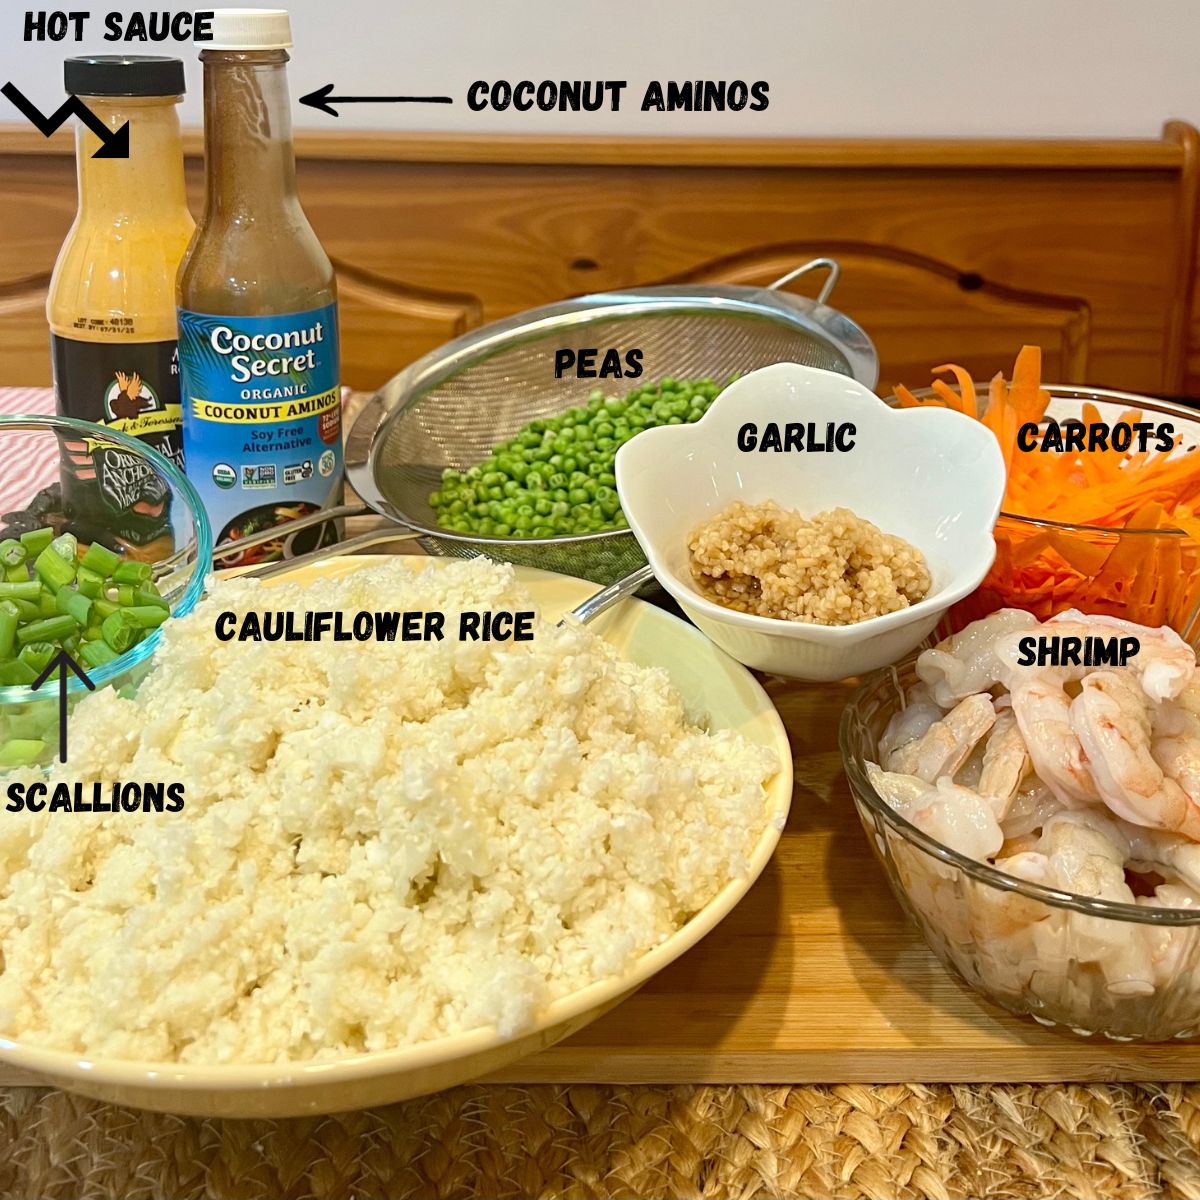 A bowl of riced cauliflower, a bottle of hot sauce and coconut aminos, scallions, garlic, carrots and fresh shrimp